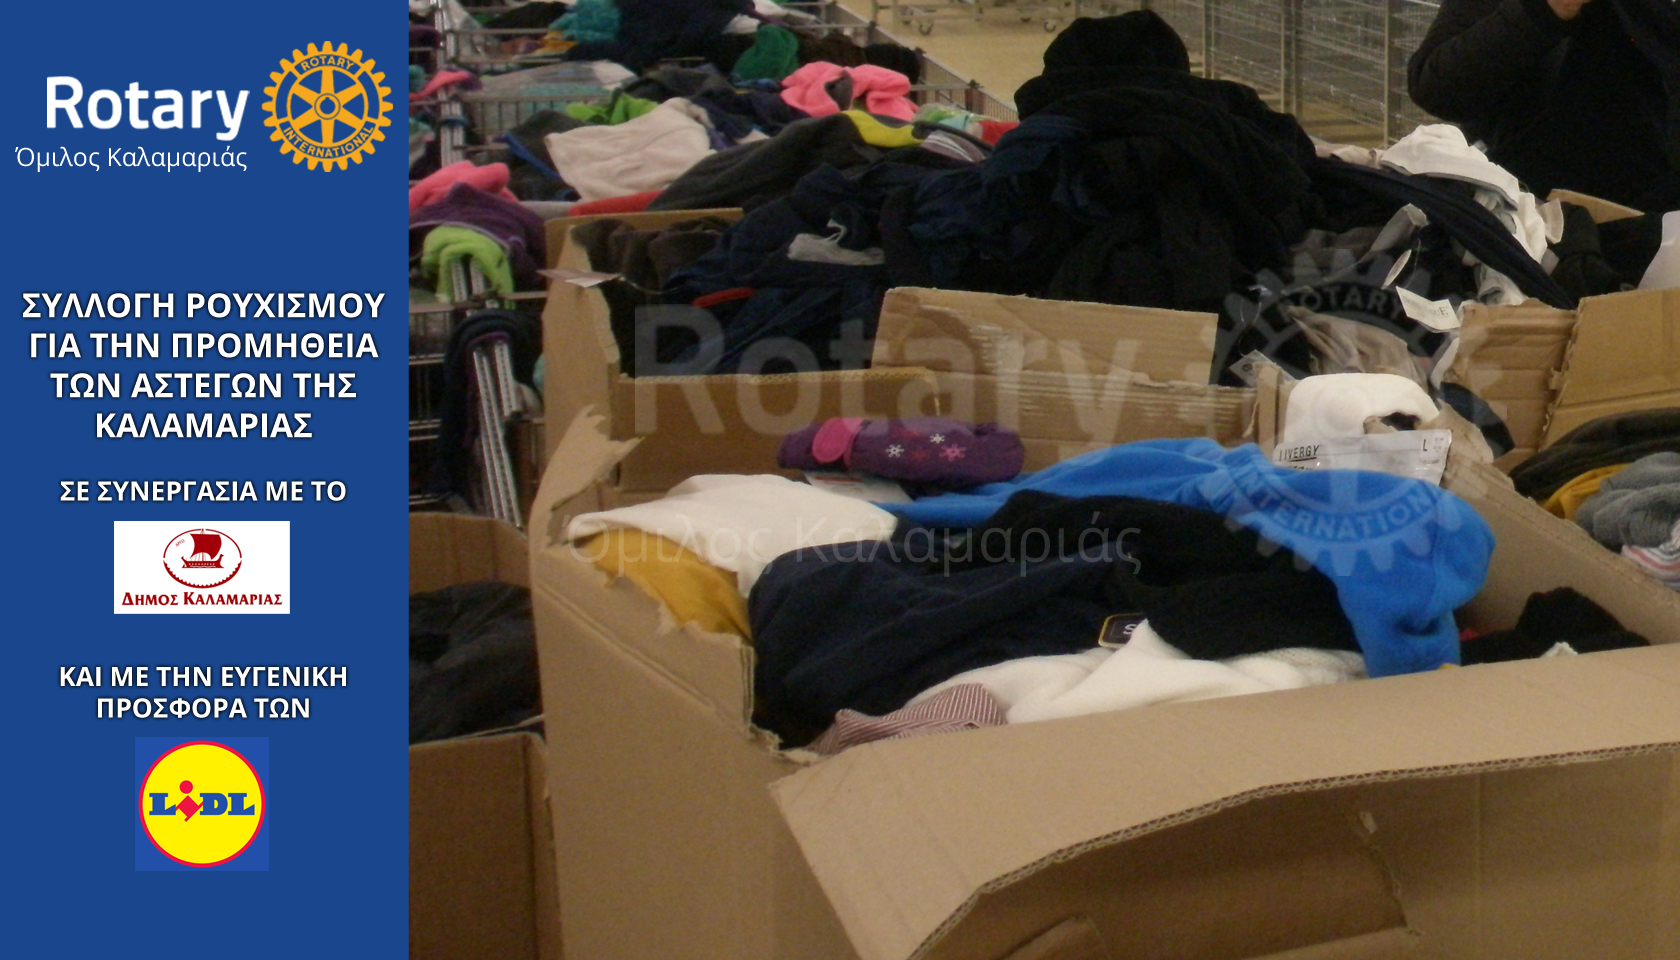 Rotary-Club-Kalamaria-and-Lidl-give-clothes-for-homeles-009